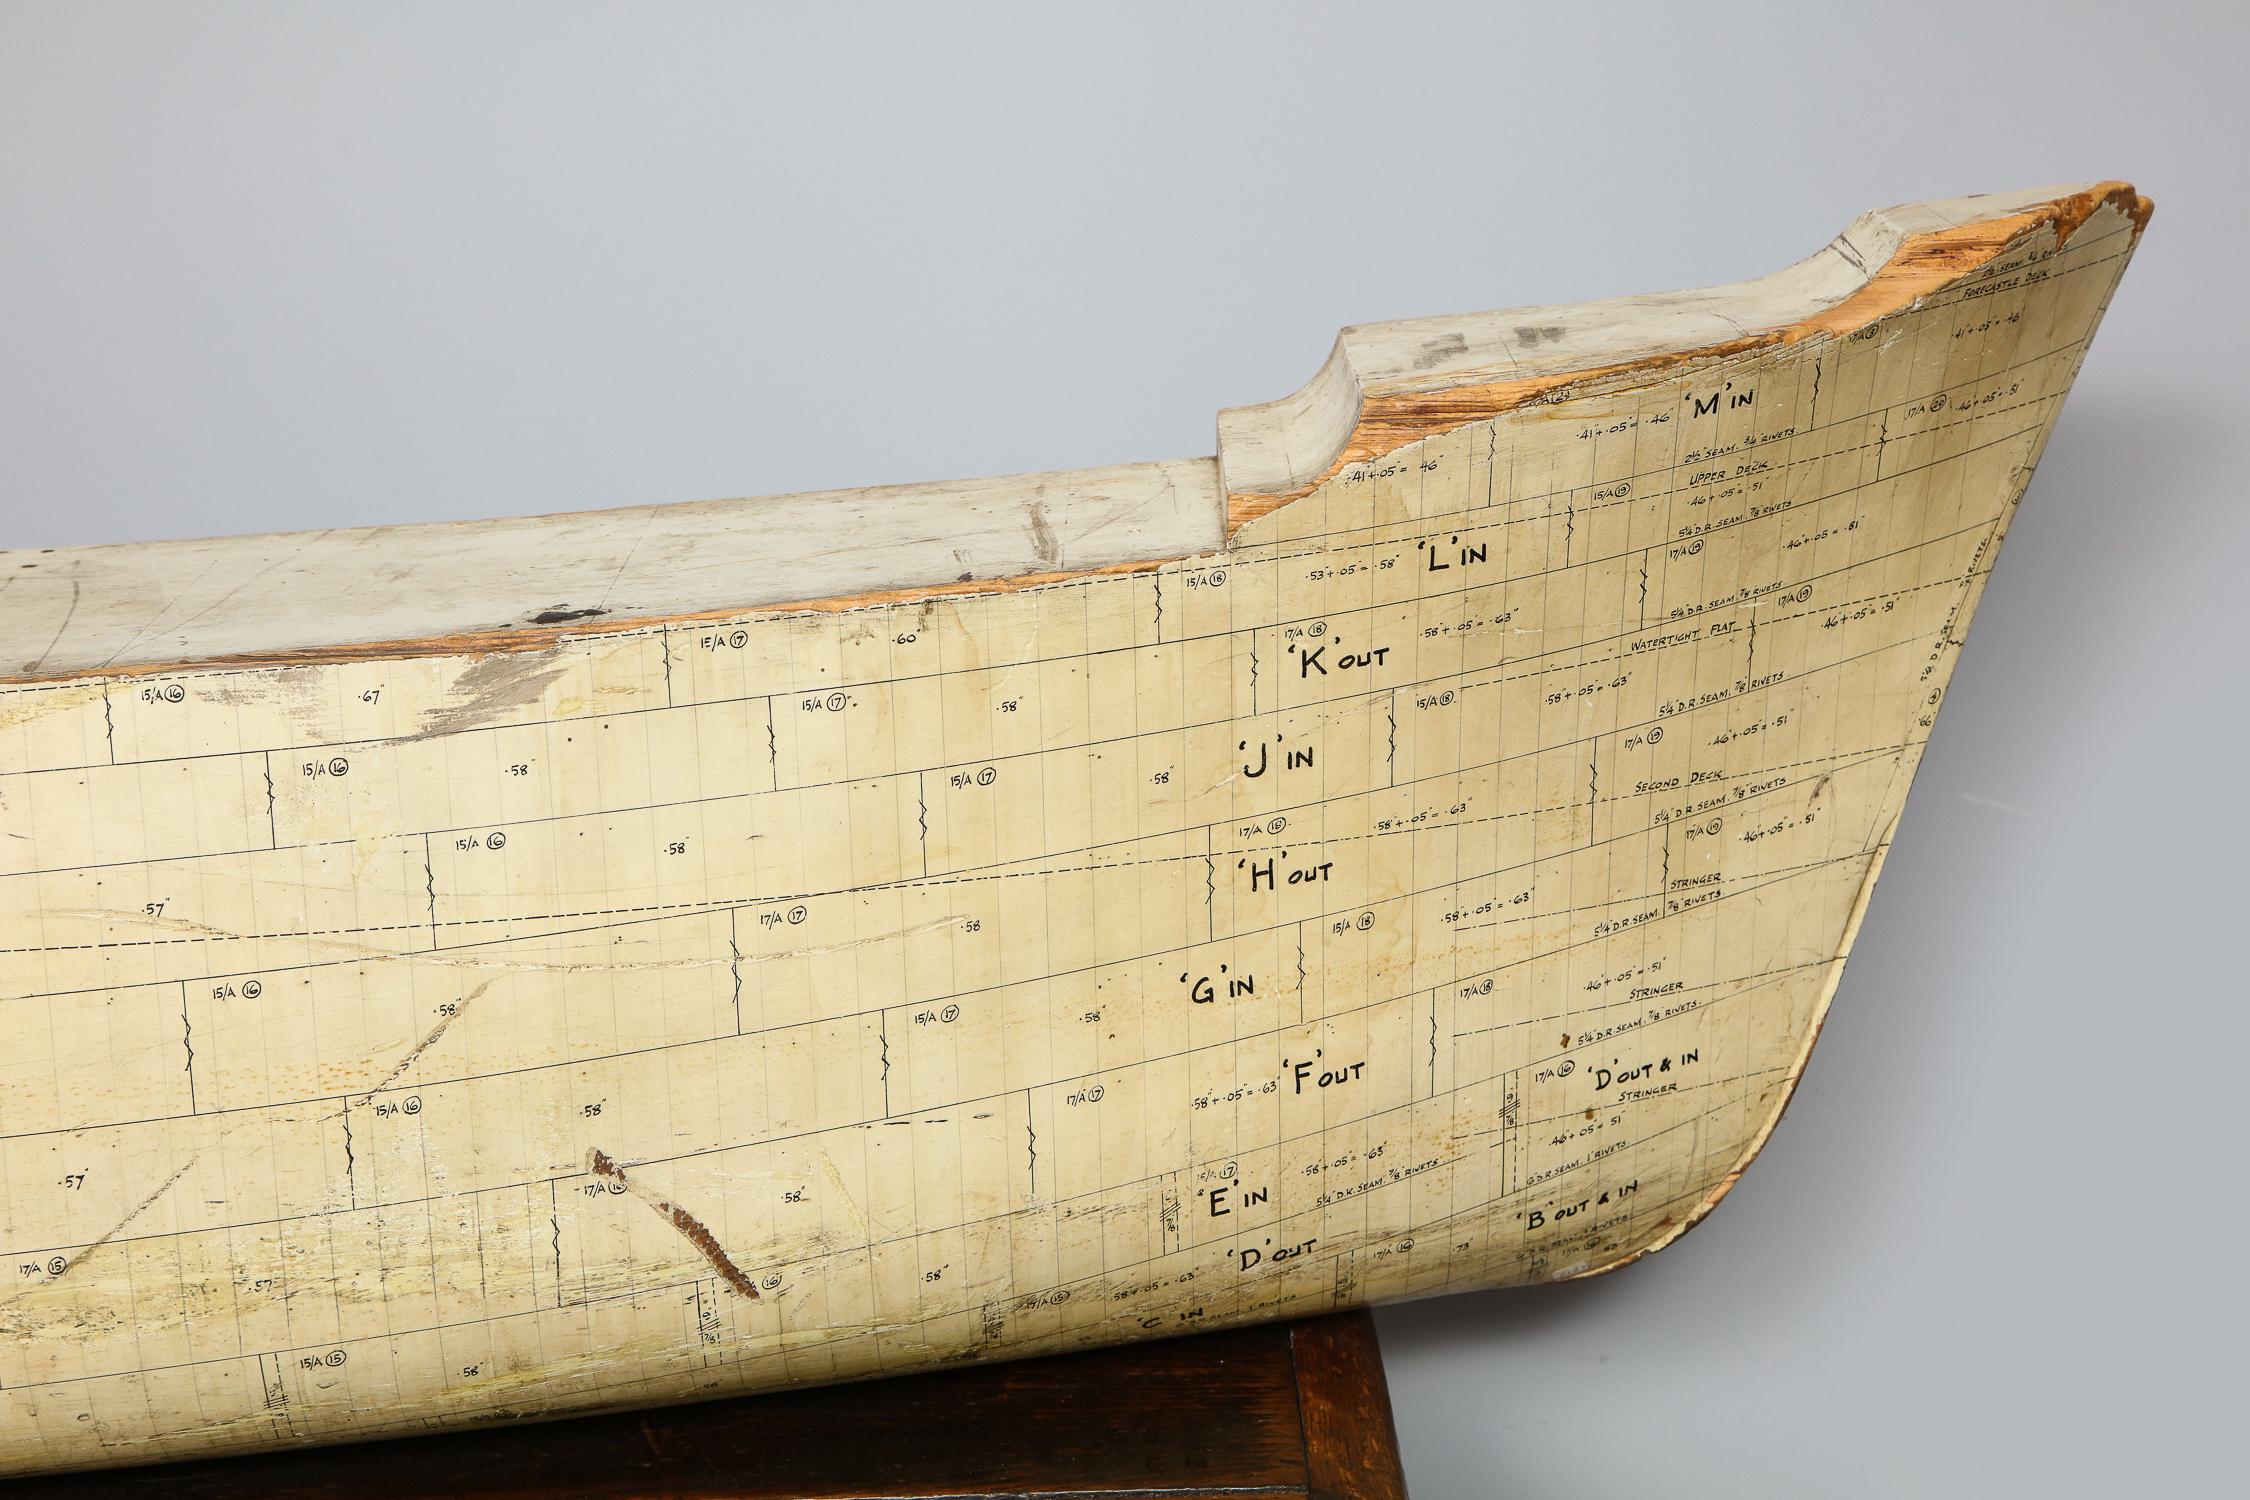 Painted Annotated Half Hull Ship Model 1